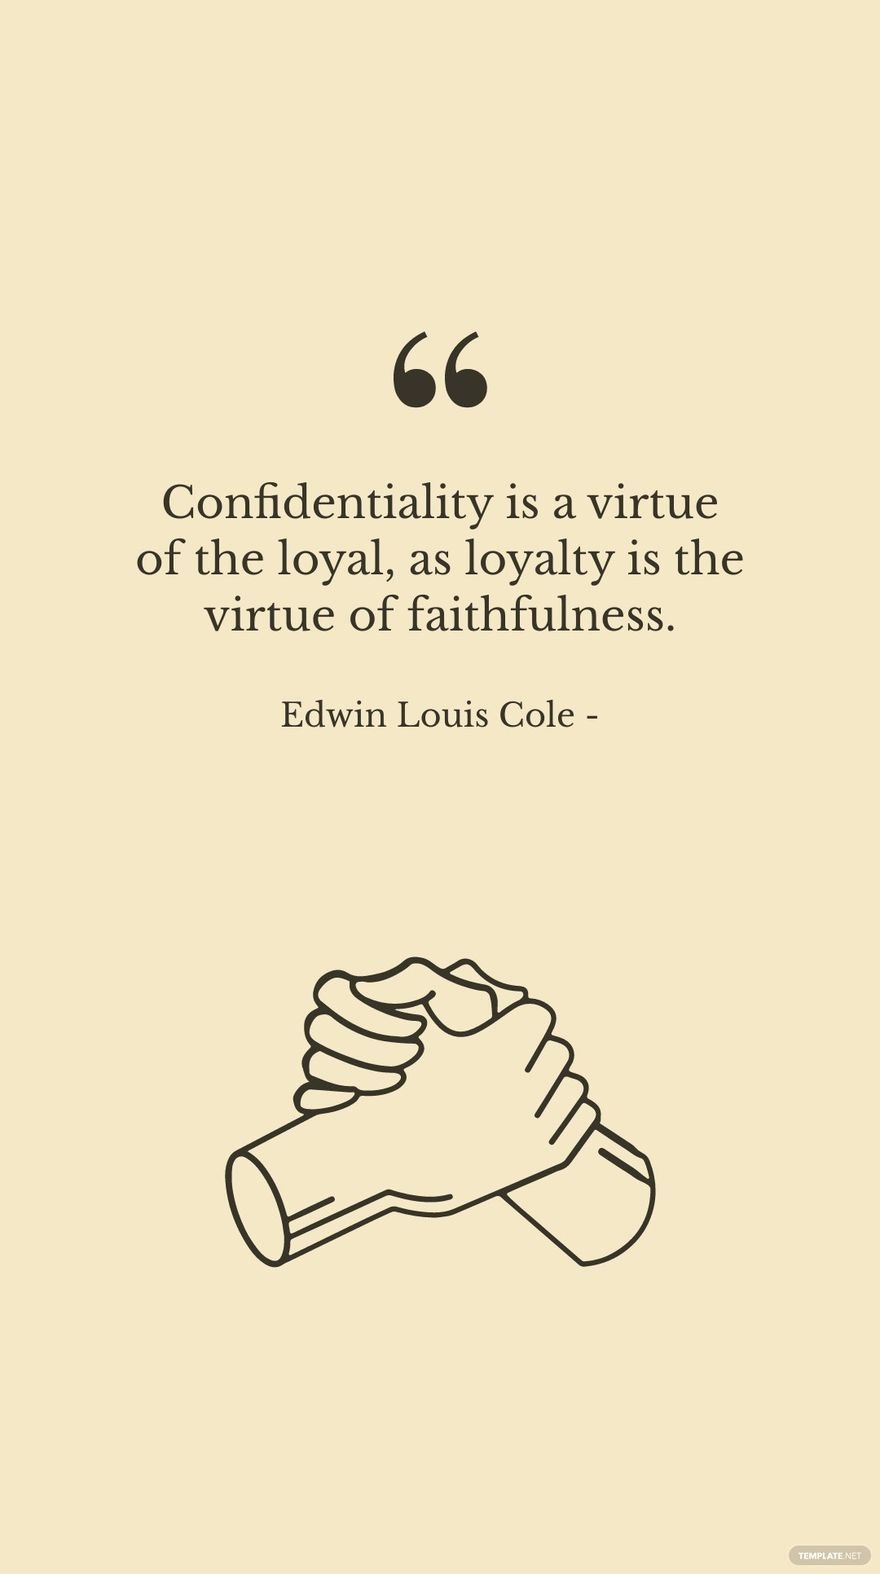 Edwin Louis Cole - Confidentiality is a virtue of the loyal, as loyalty is the virtue of faithfulness.